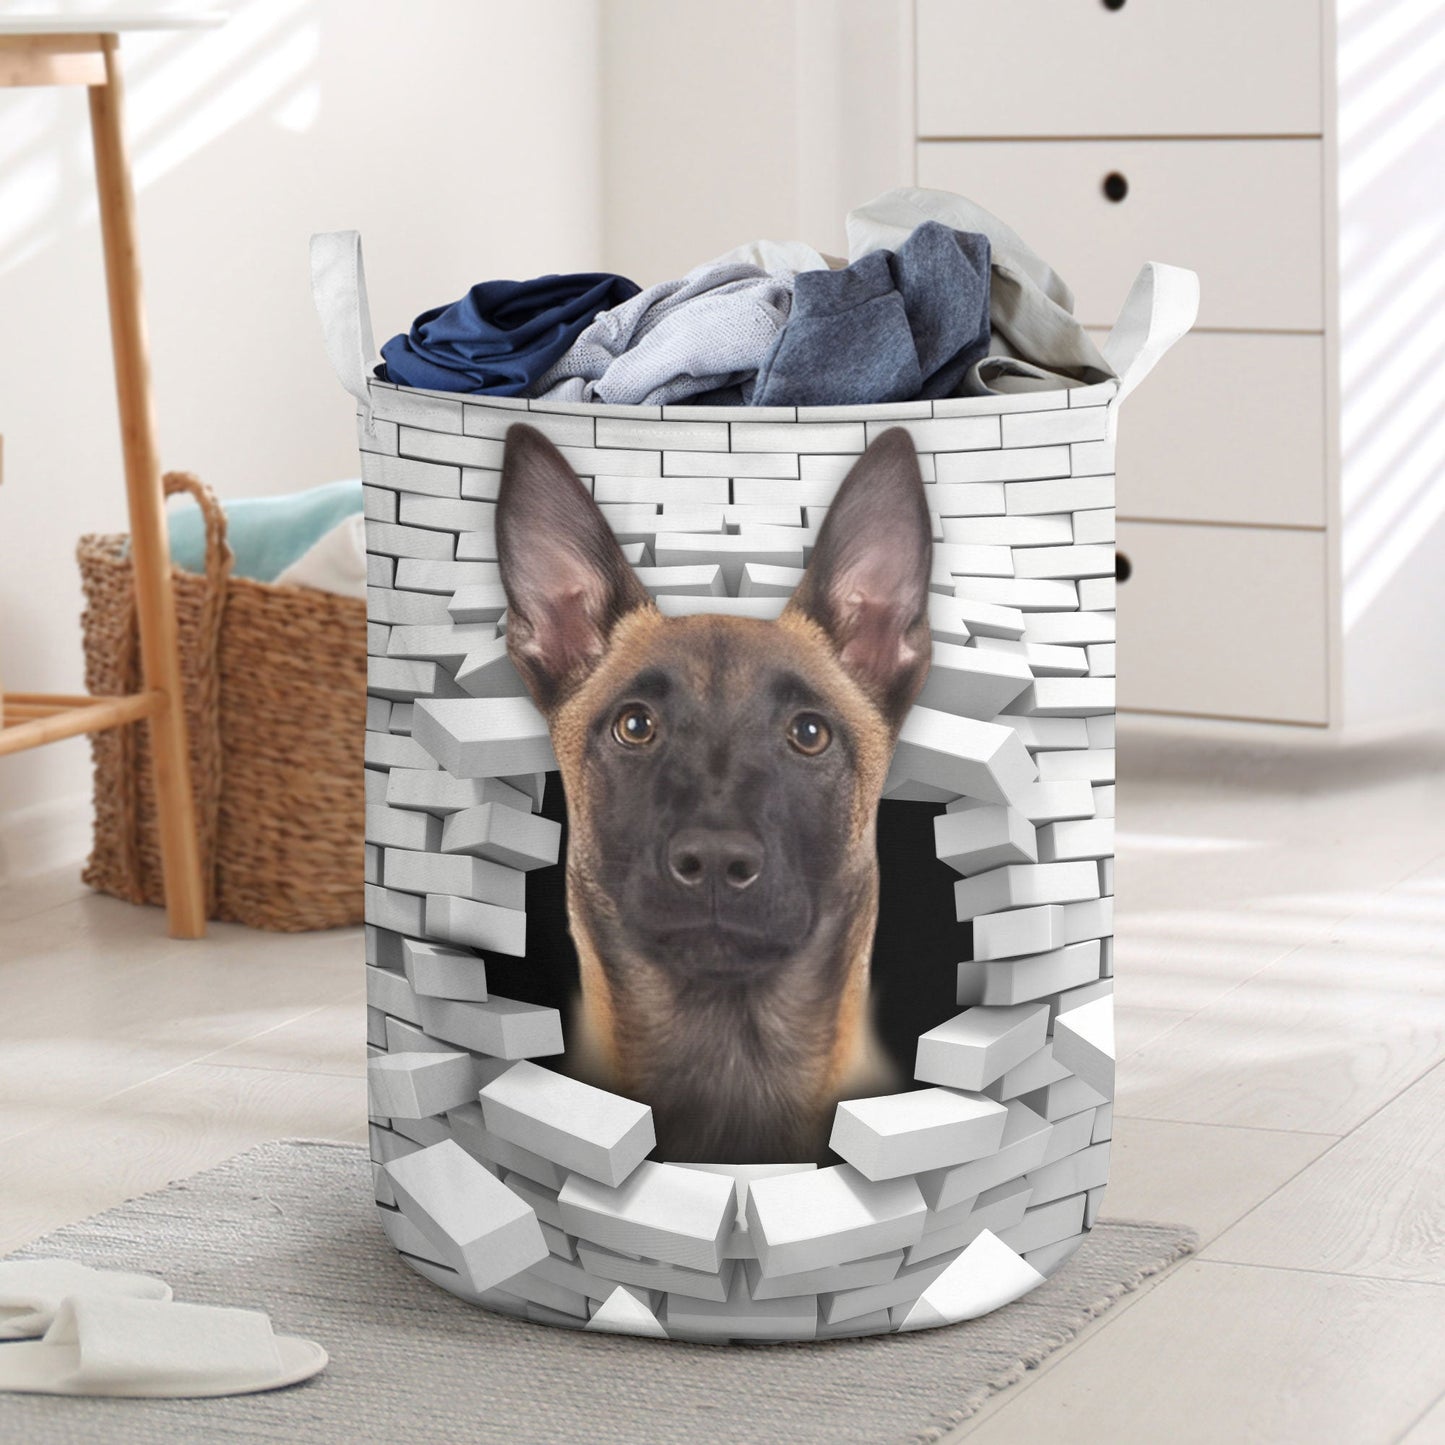 Belgain Malinois - In The Hole Of Wall Pattern Laundry Basket